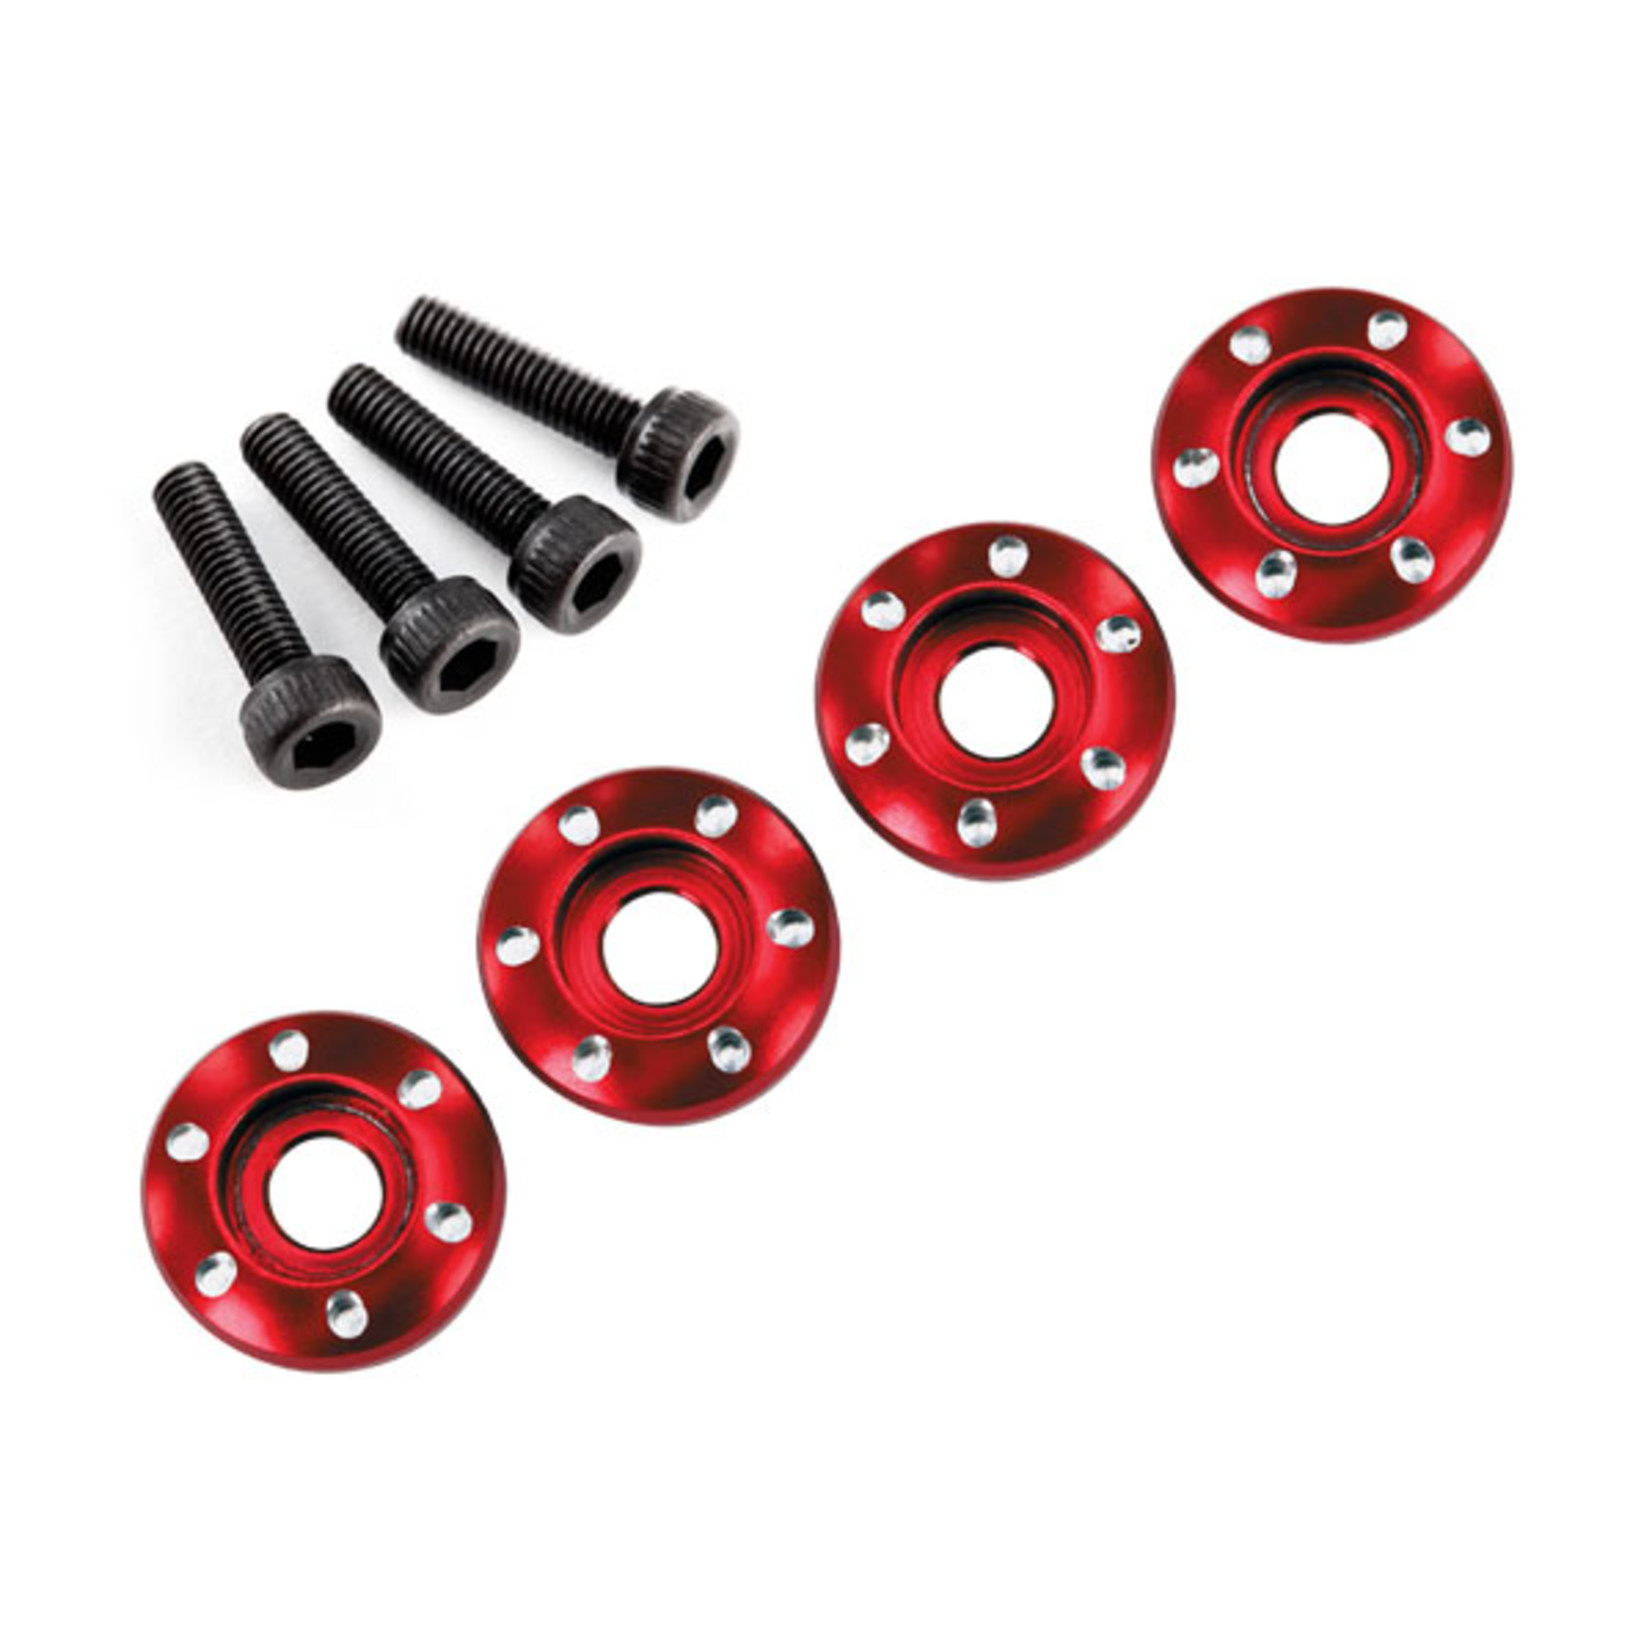 Traxxas 7668R - Wheel nut washer, machined aluminum, red /